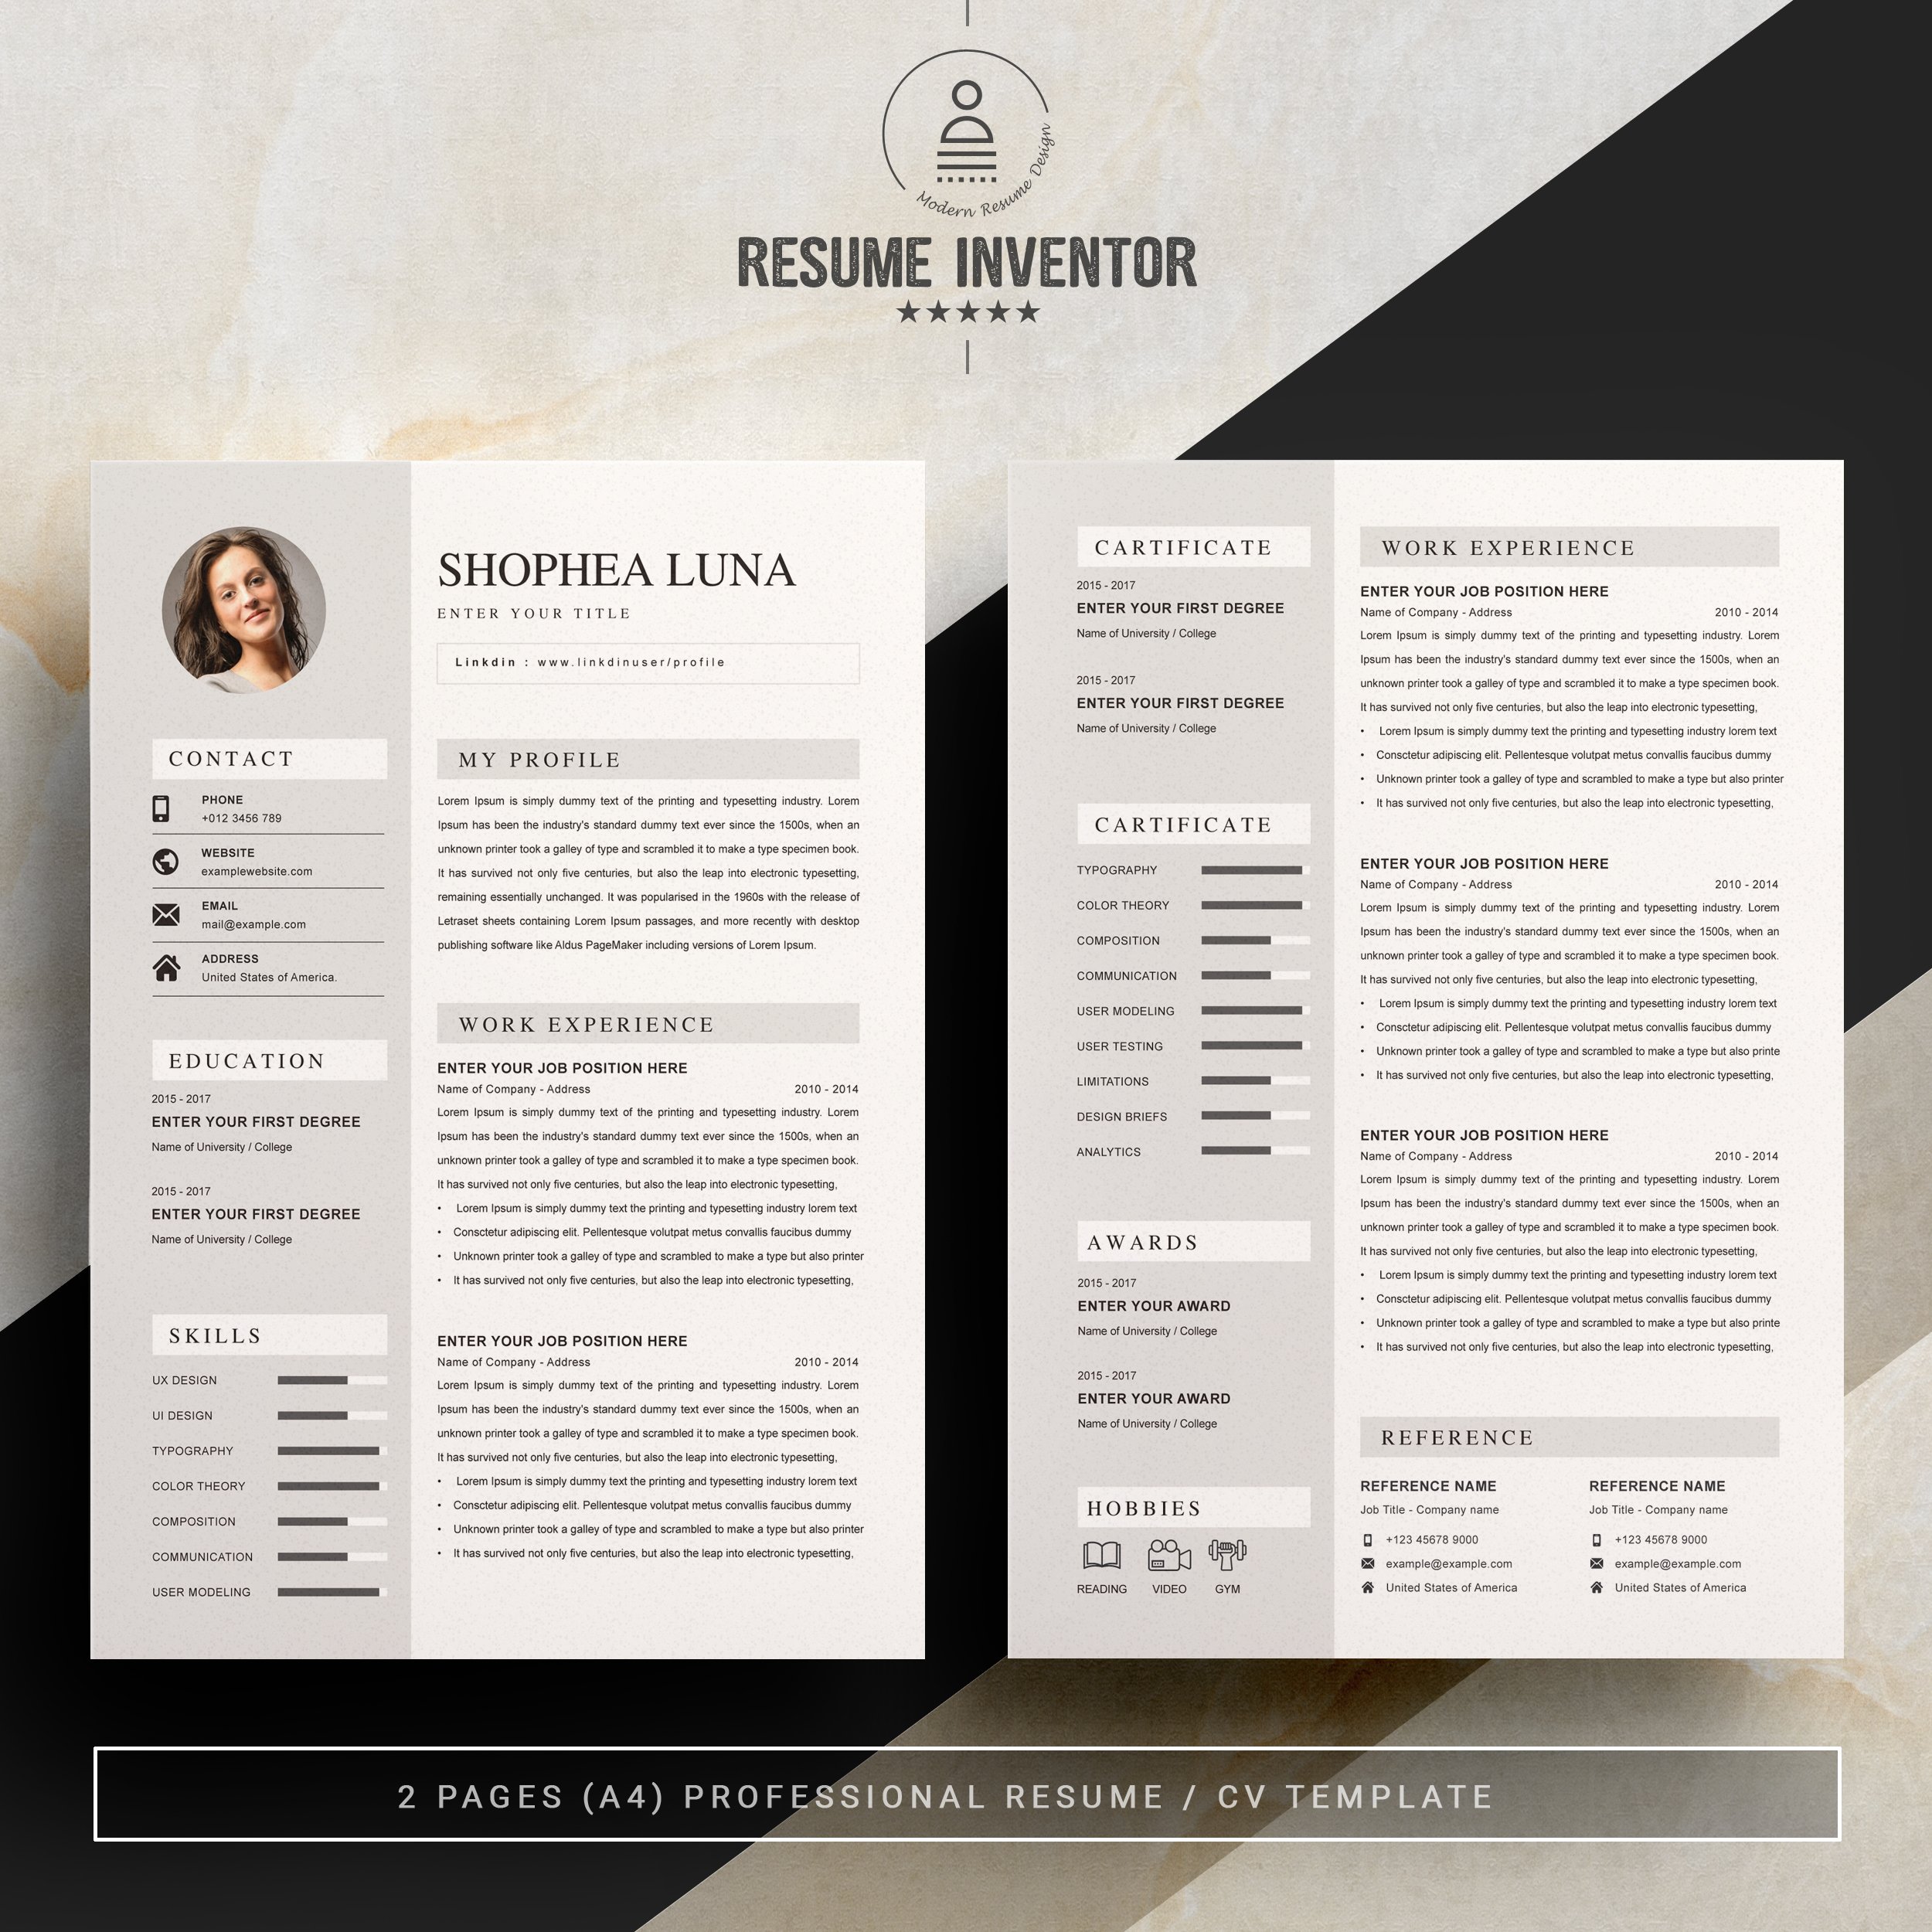 Curriculum Vitae Template / New CV preview image.